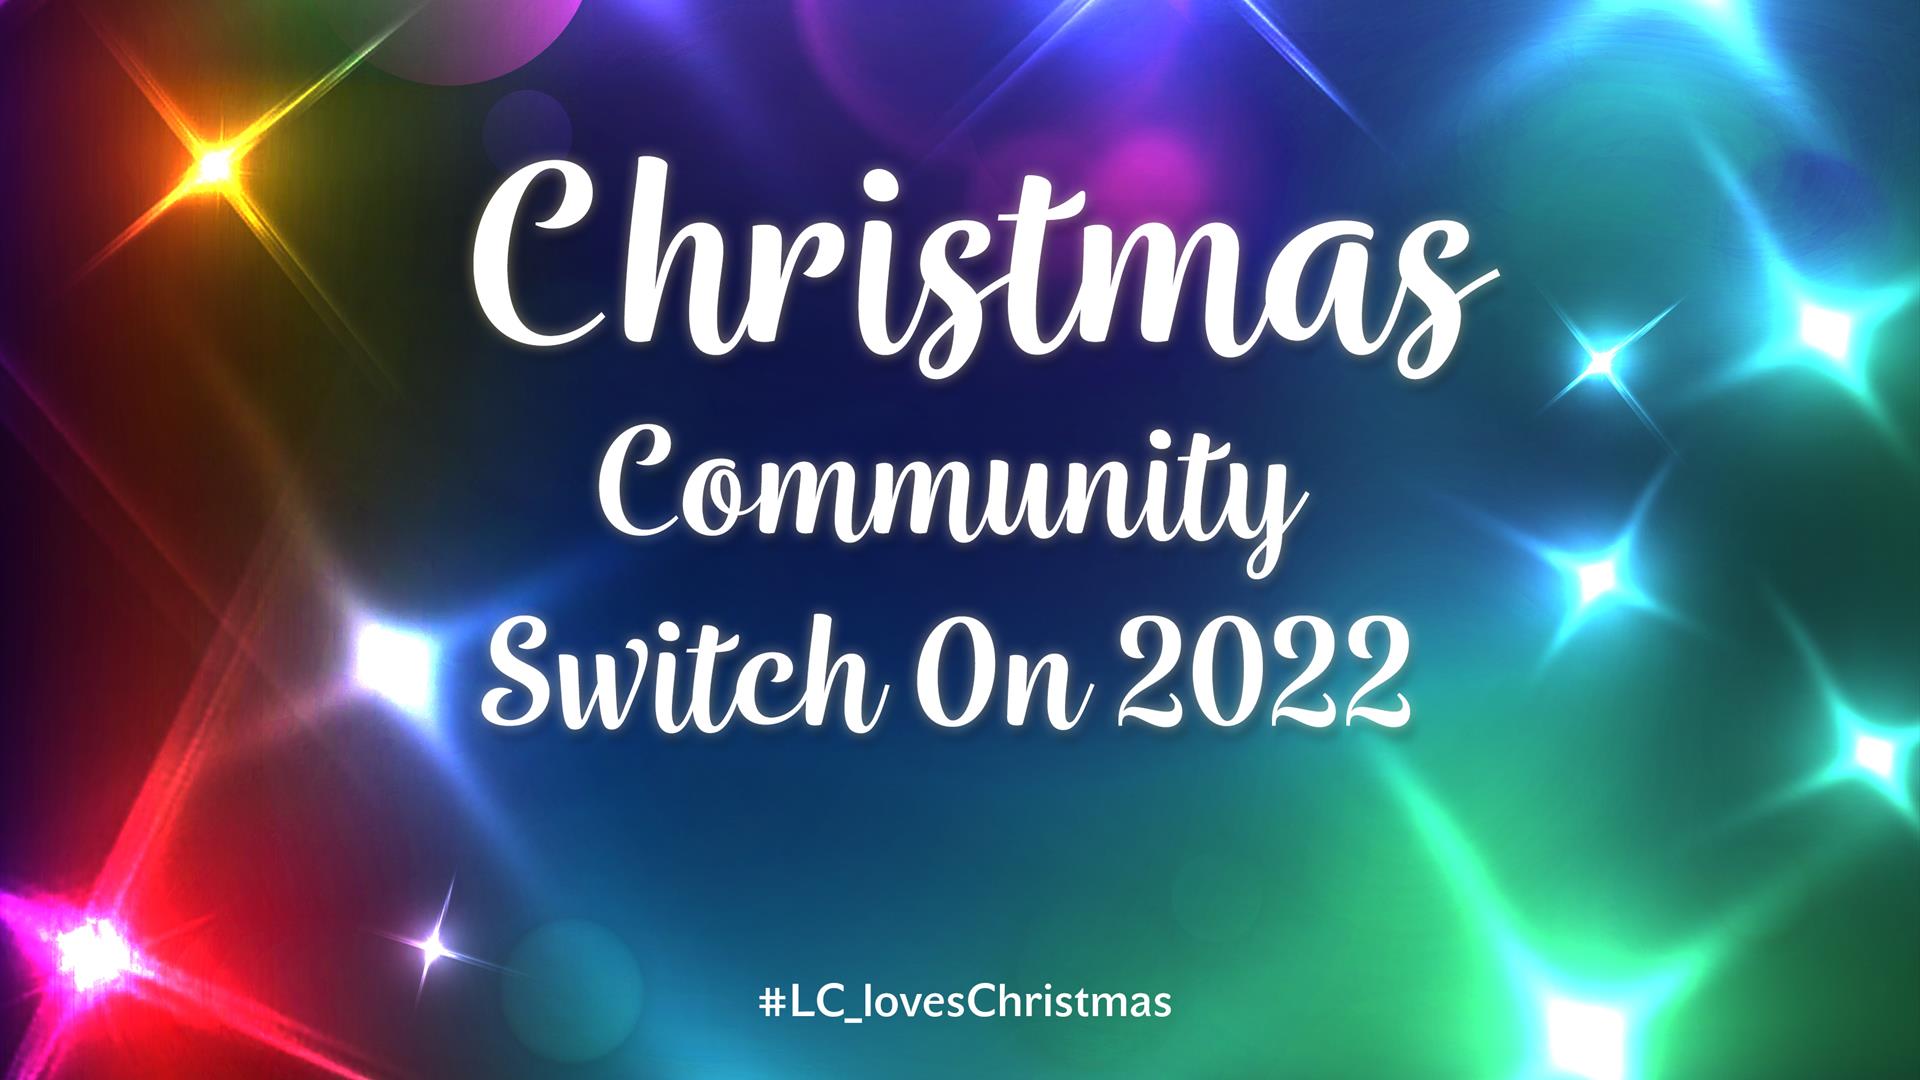 A Poster type Image of bright coloured christmas lights with the words Christmas Community Switch On 2022 in the centre.